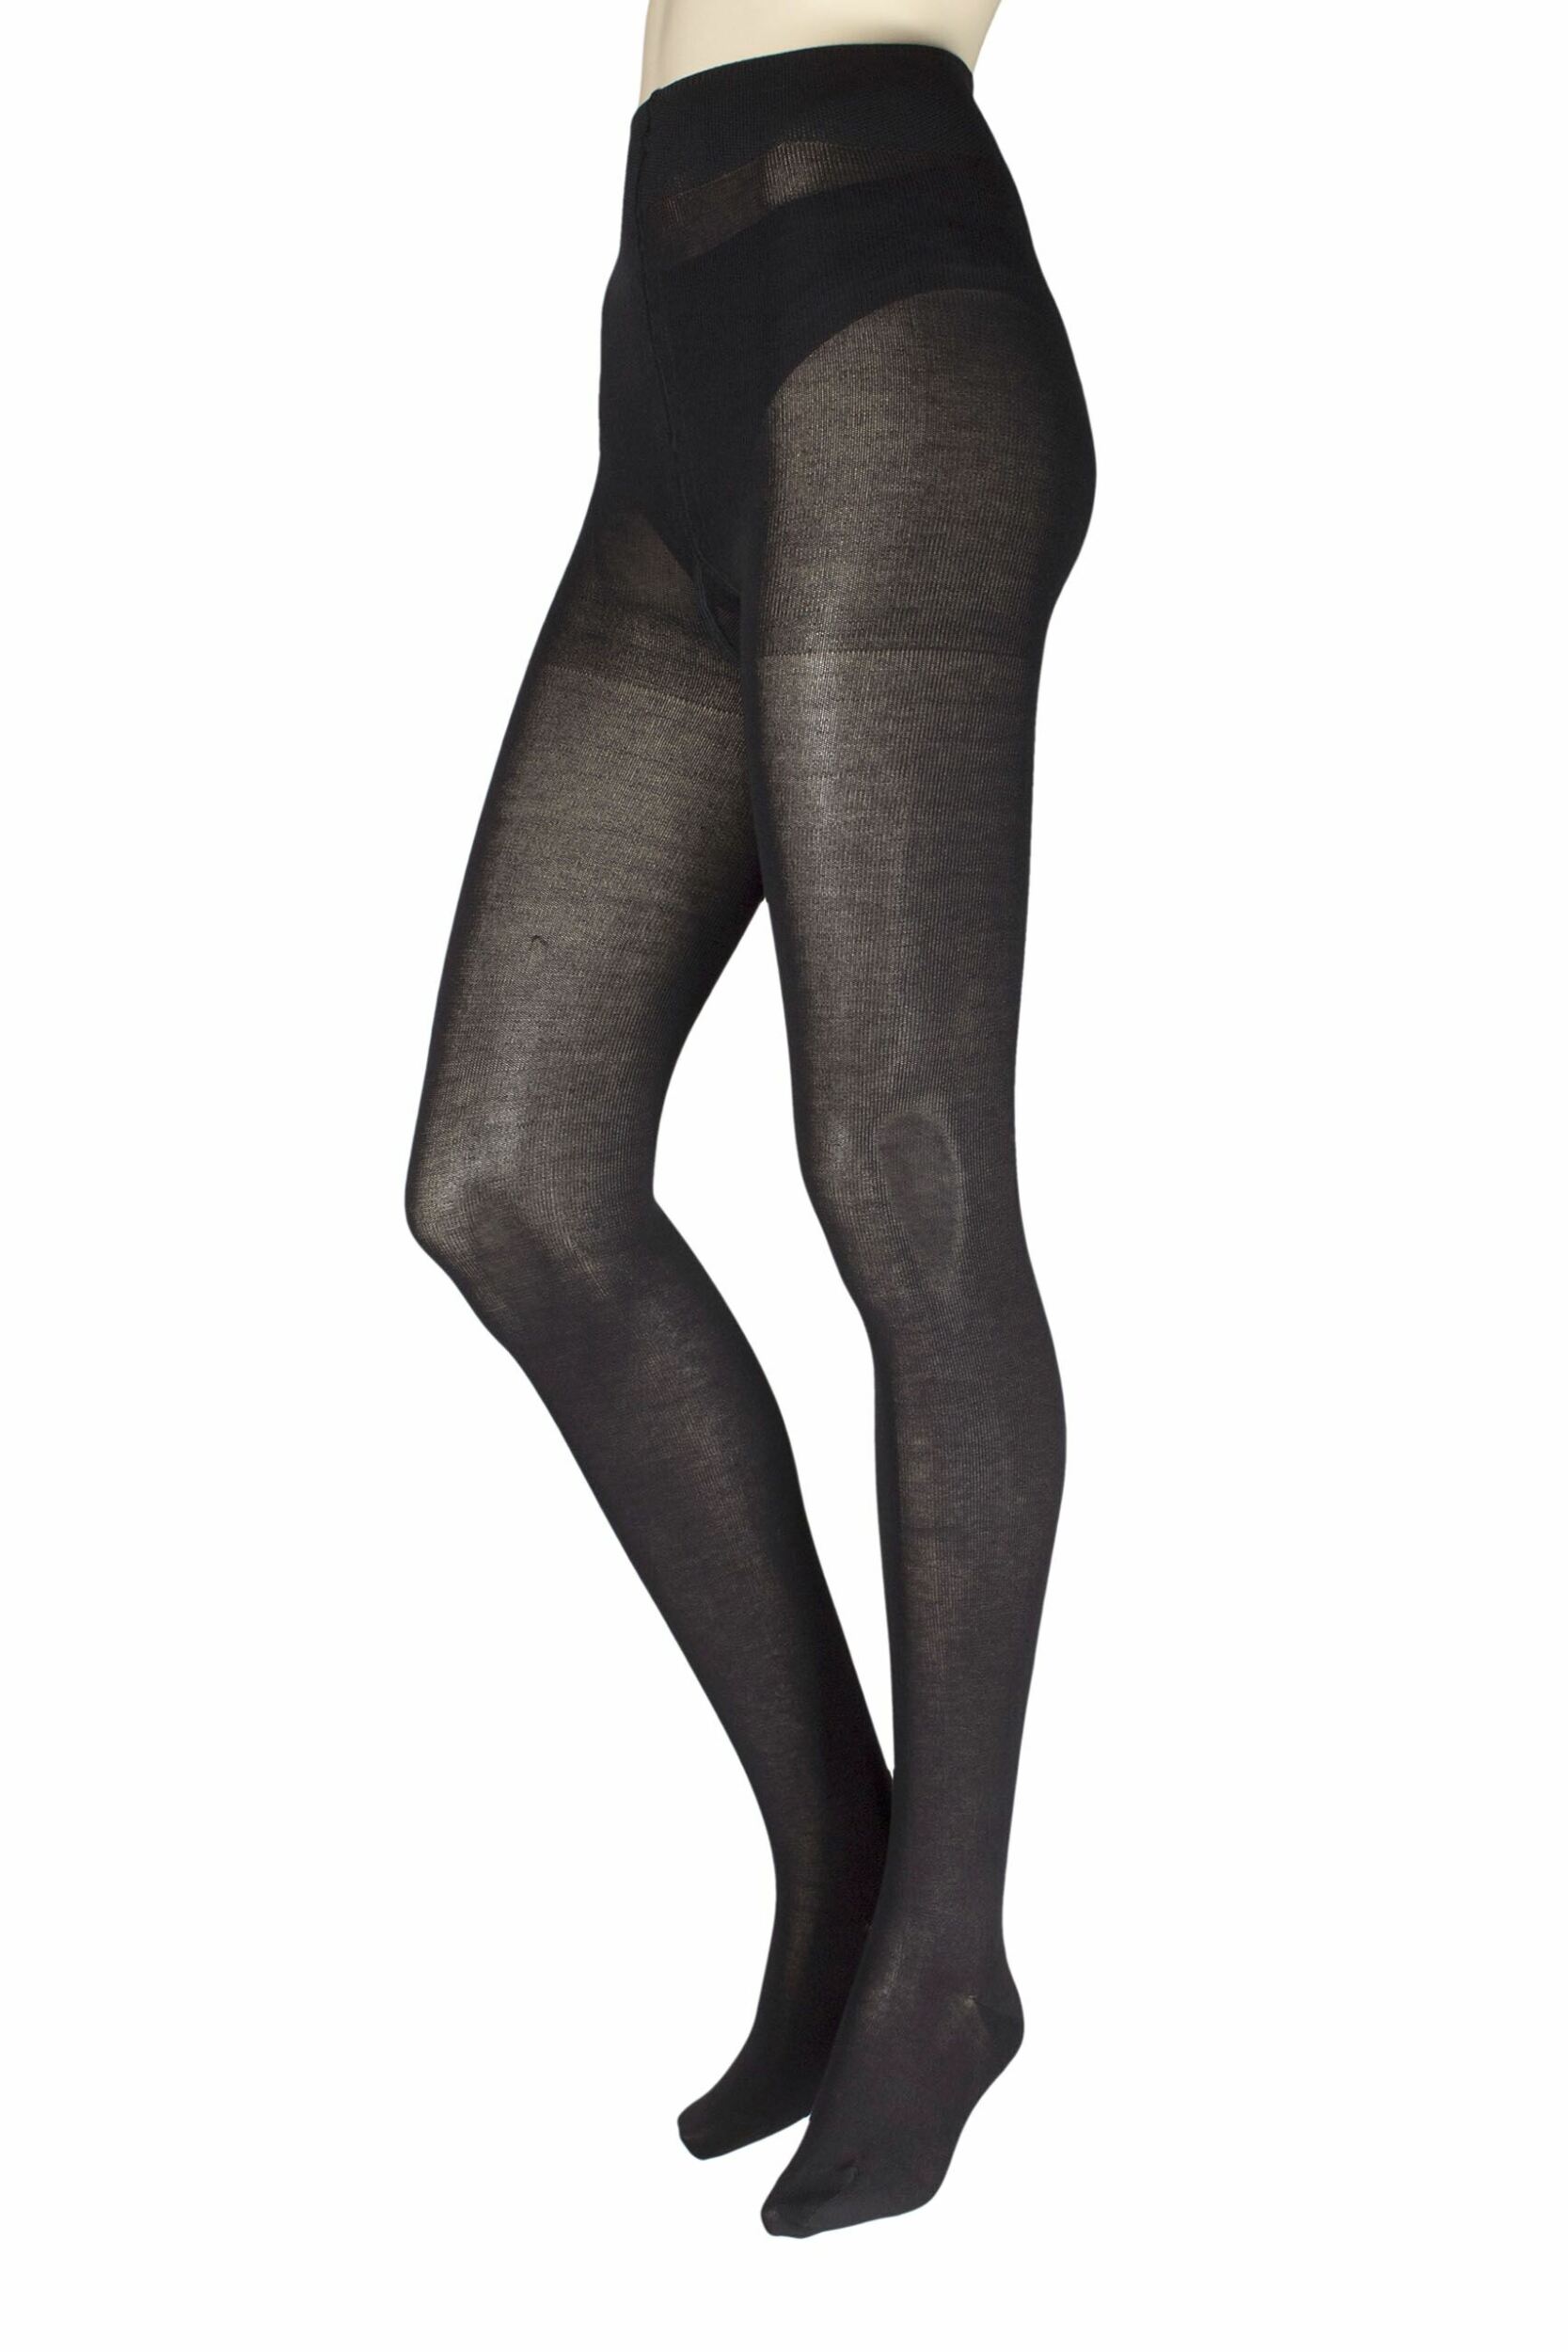 Ladies 1 Pair Falke Family Combed Cotton Tights Black Small